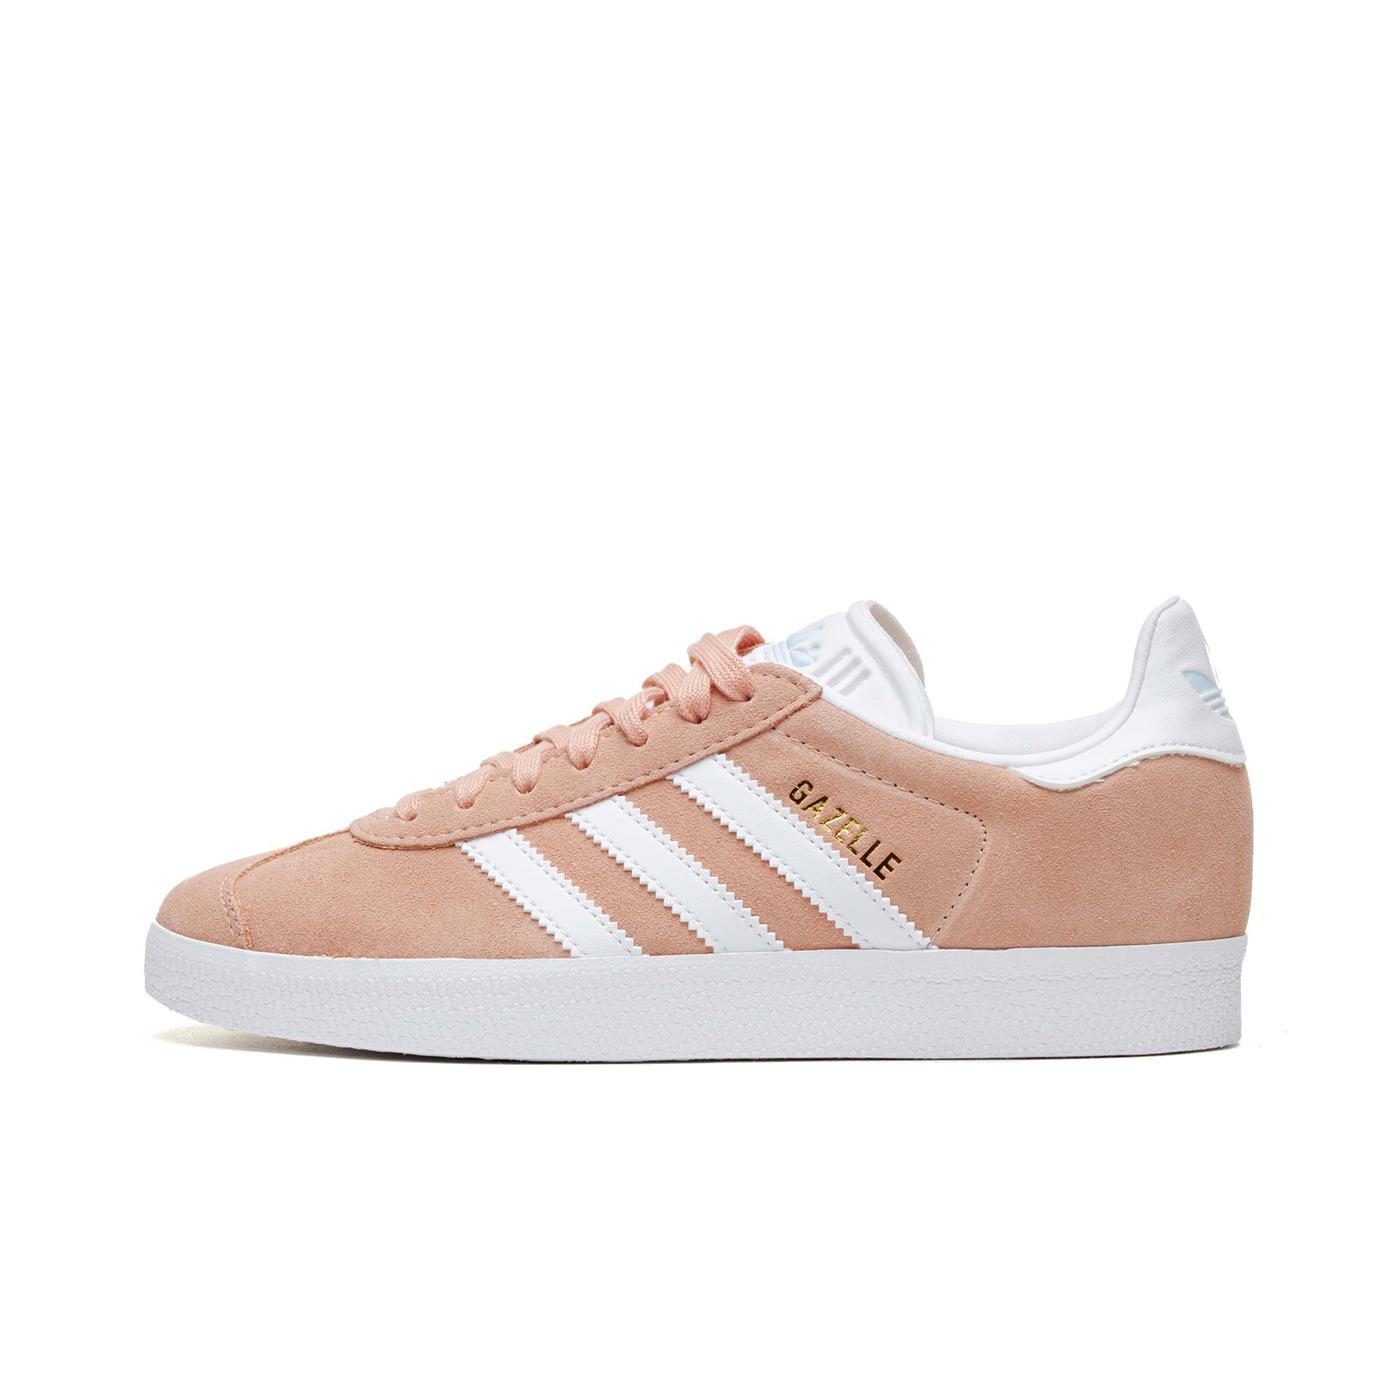 RvceShops Sneakers kevin ADIDAS Gazelle W Pink for Woman GZ1961  Scarpe kevin adidas Ultrabounce J H03688 White